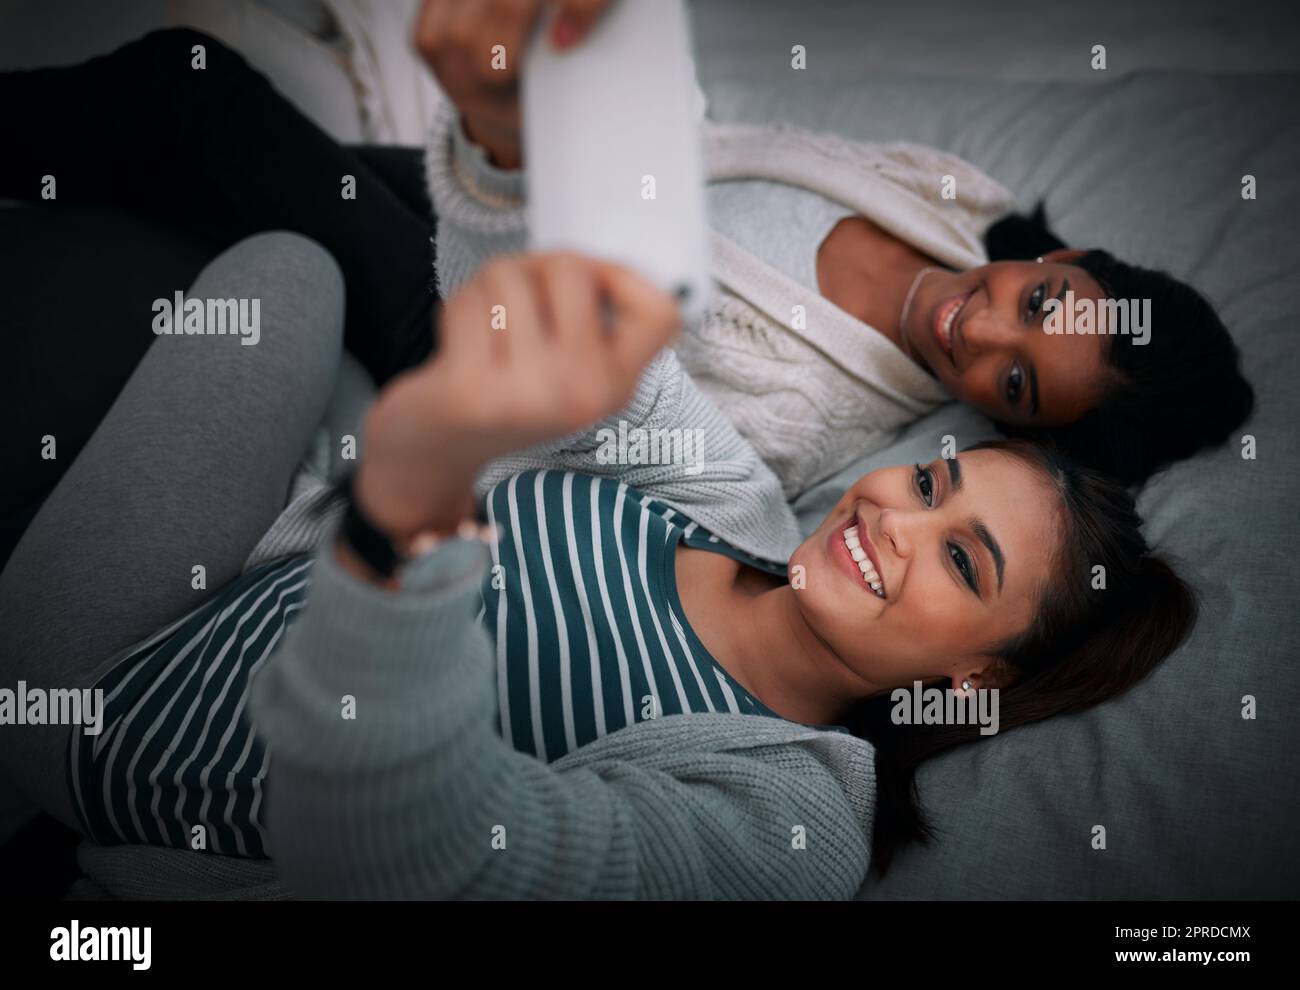 Sleepover selfie vibes. two young women lying taking selfies while lying on a bed. Stock Photo